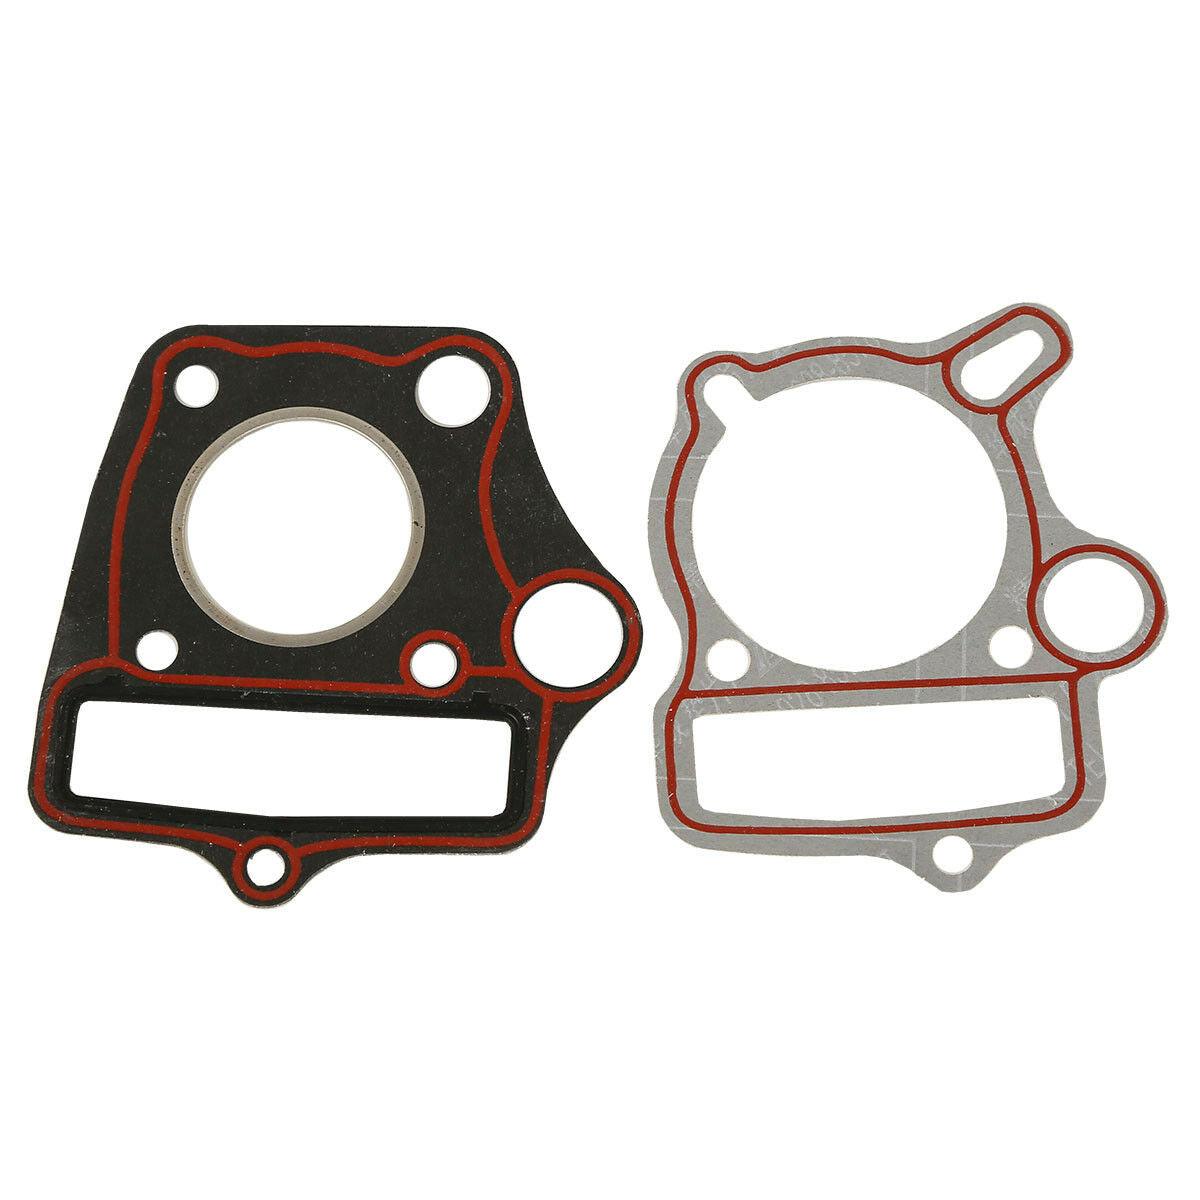 39mm Bore Cylinder Head Piston Engine Rebuild Kit For Honda XR50R 1999-2004 2003 - Moto Life Products